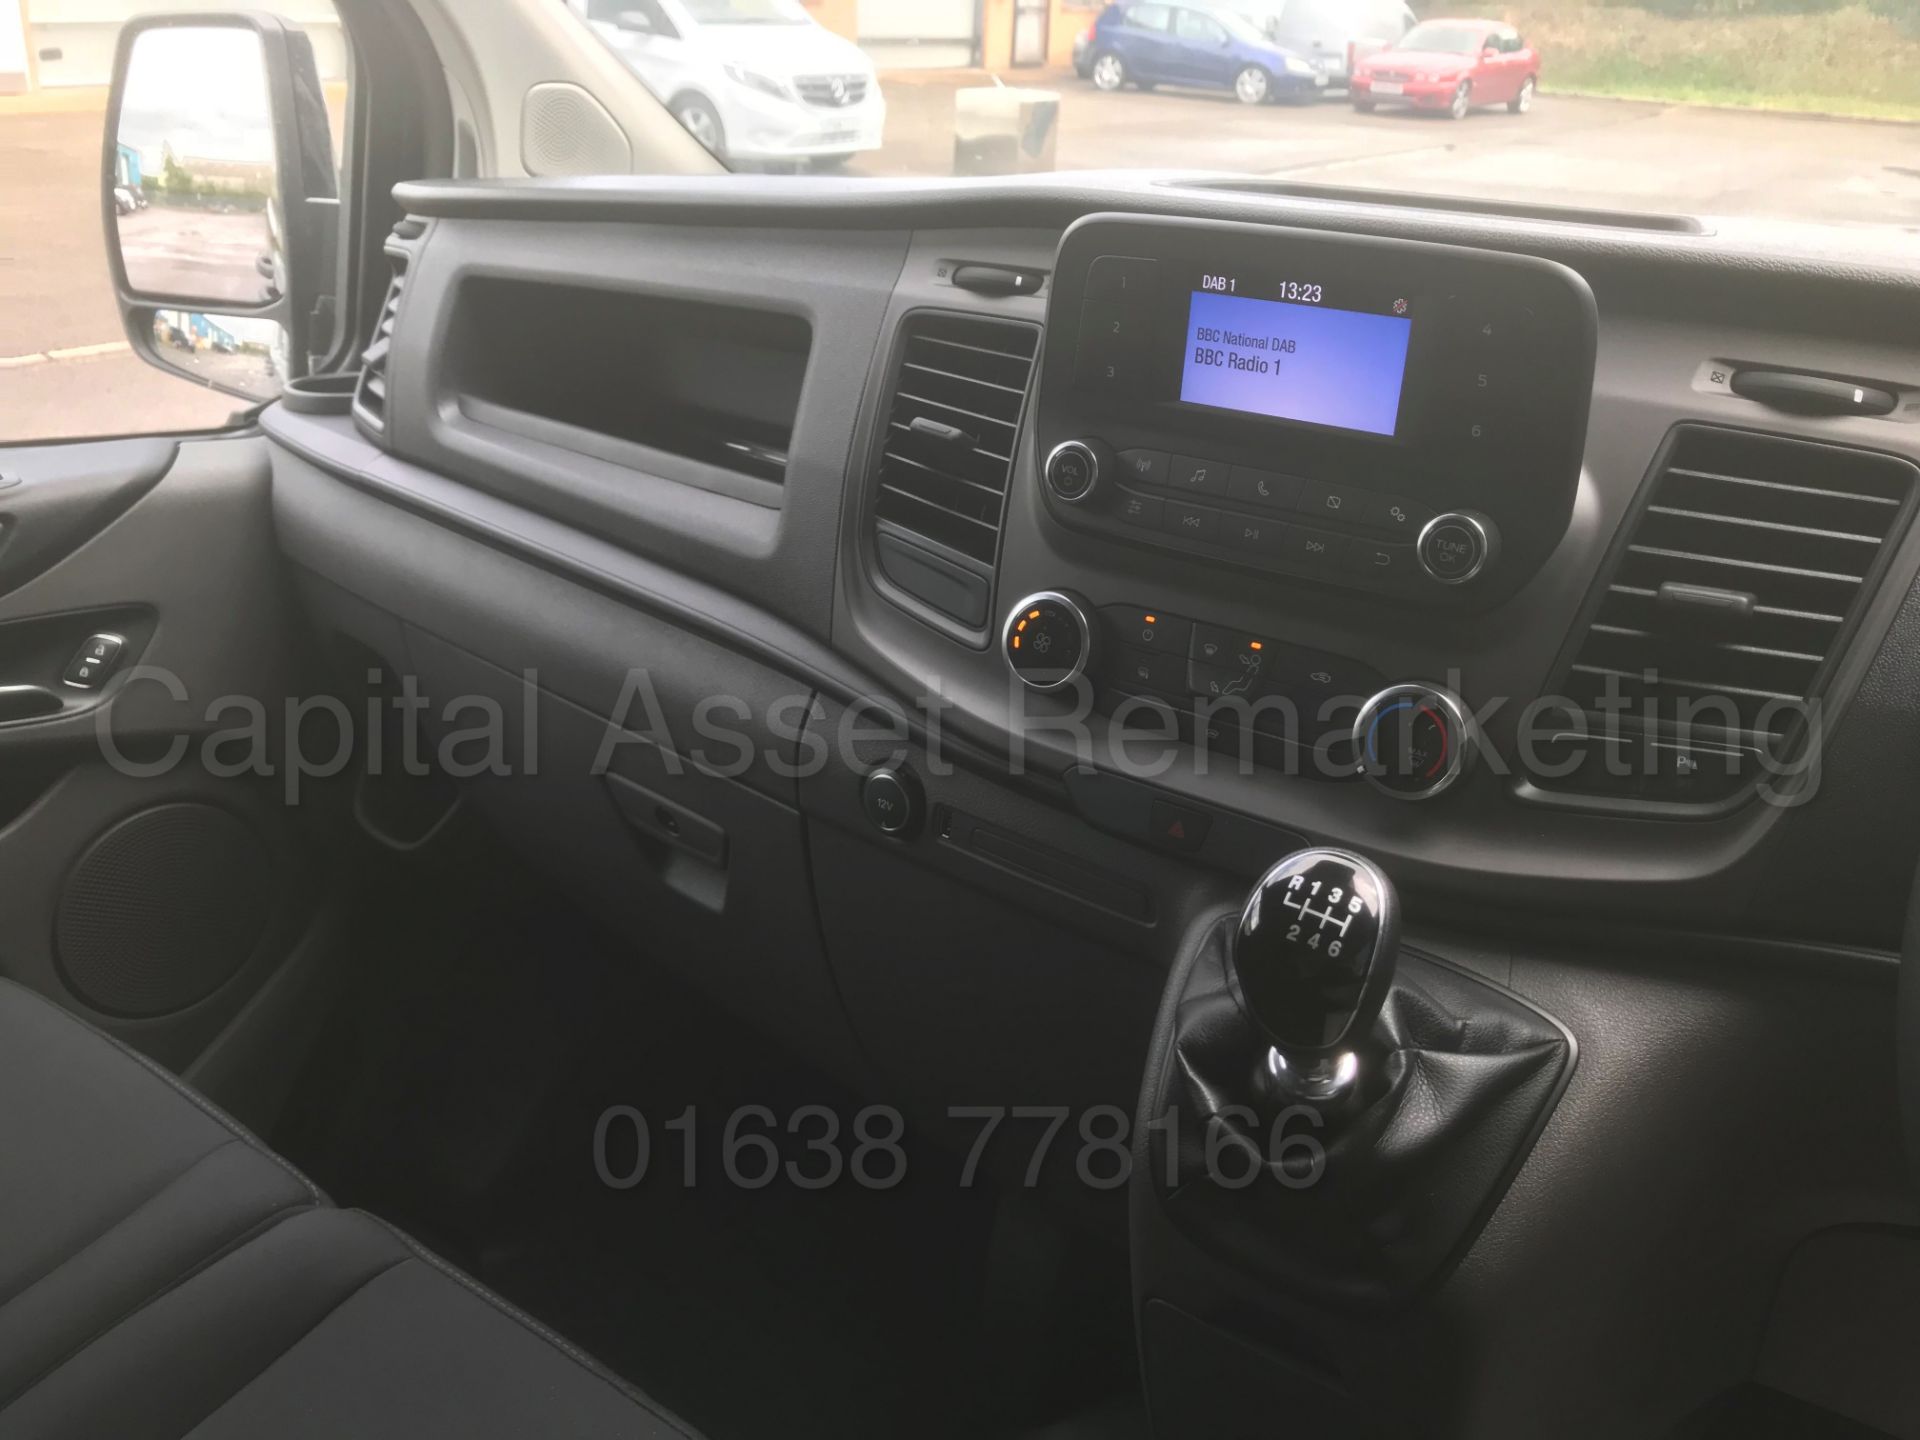 FORD TRANSIT CUSTOM *TREND EDITION* (2018 - ALL NEW MODEL) '2.0 TDCI - 6 SPEED' *DELIVERY MILEAGE* - Image 41 of 49